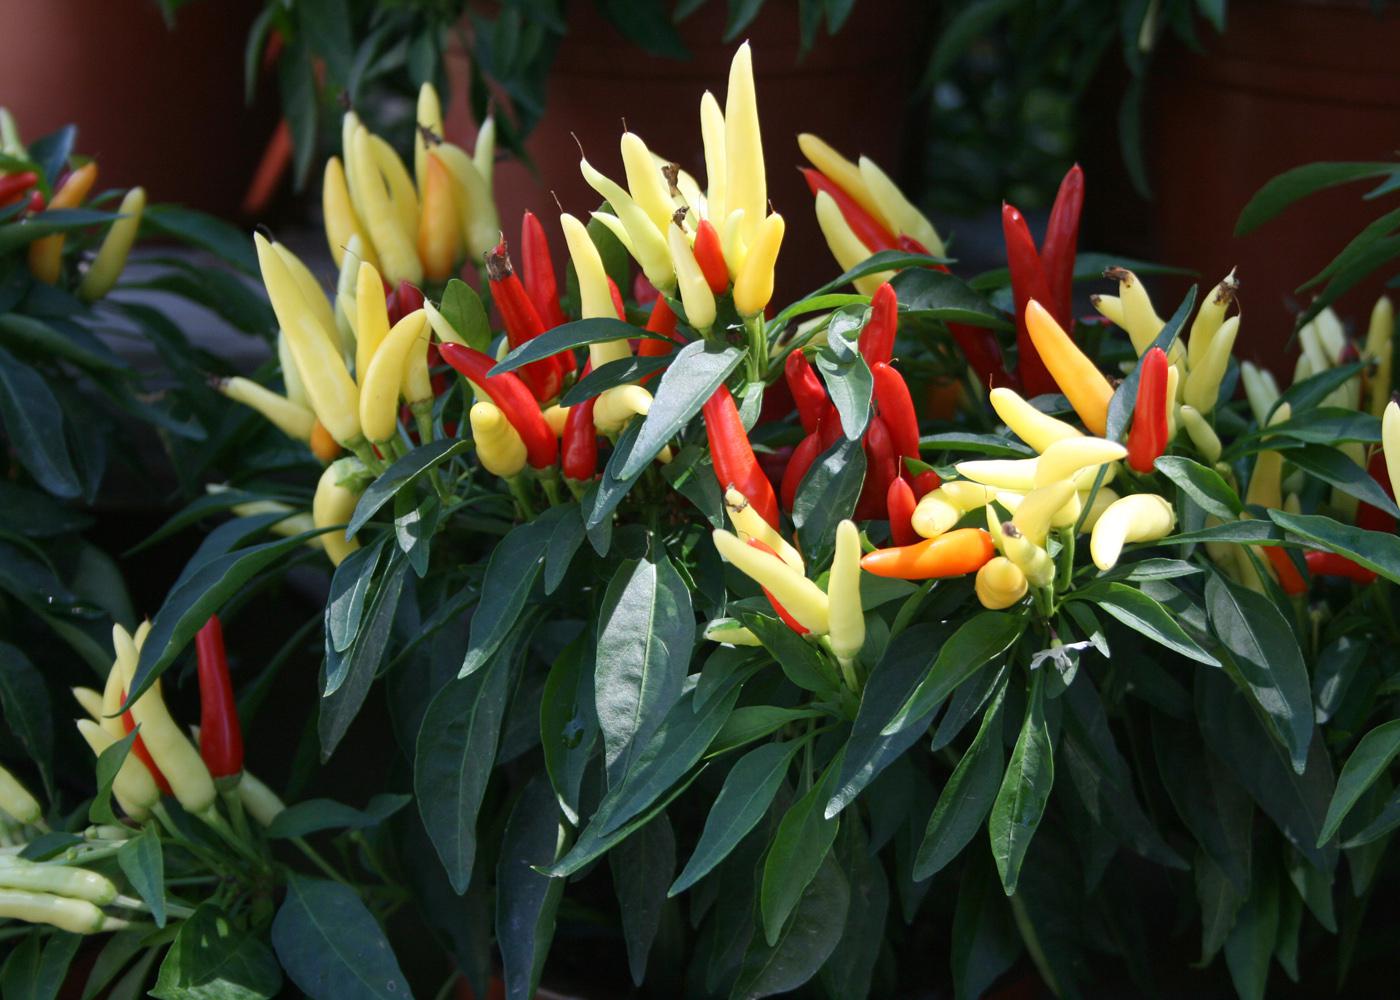 Chilly Chili seems to explode in color, with the fruit starting as yellow green and transitioning to a bright orange and brilliant red. 